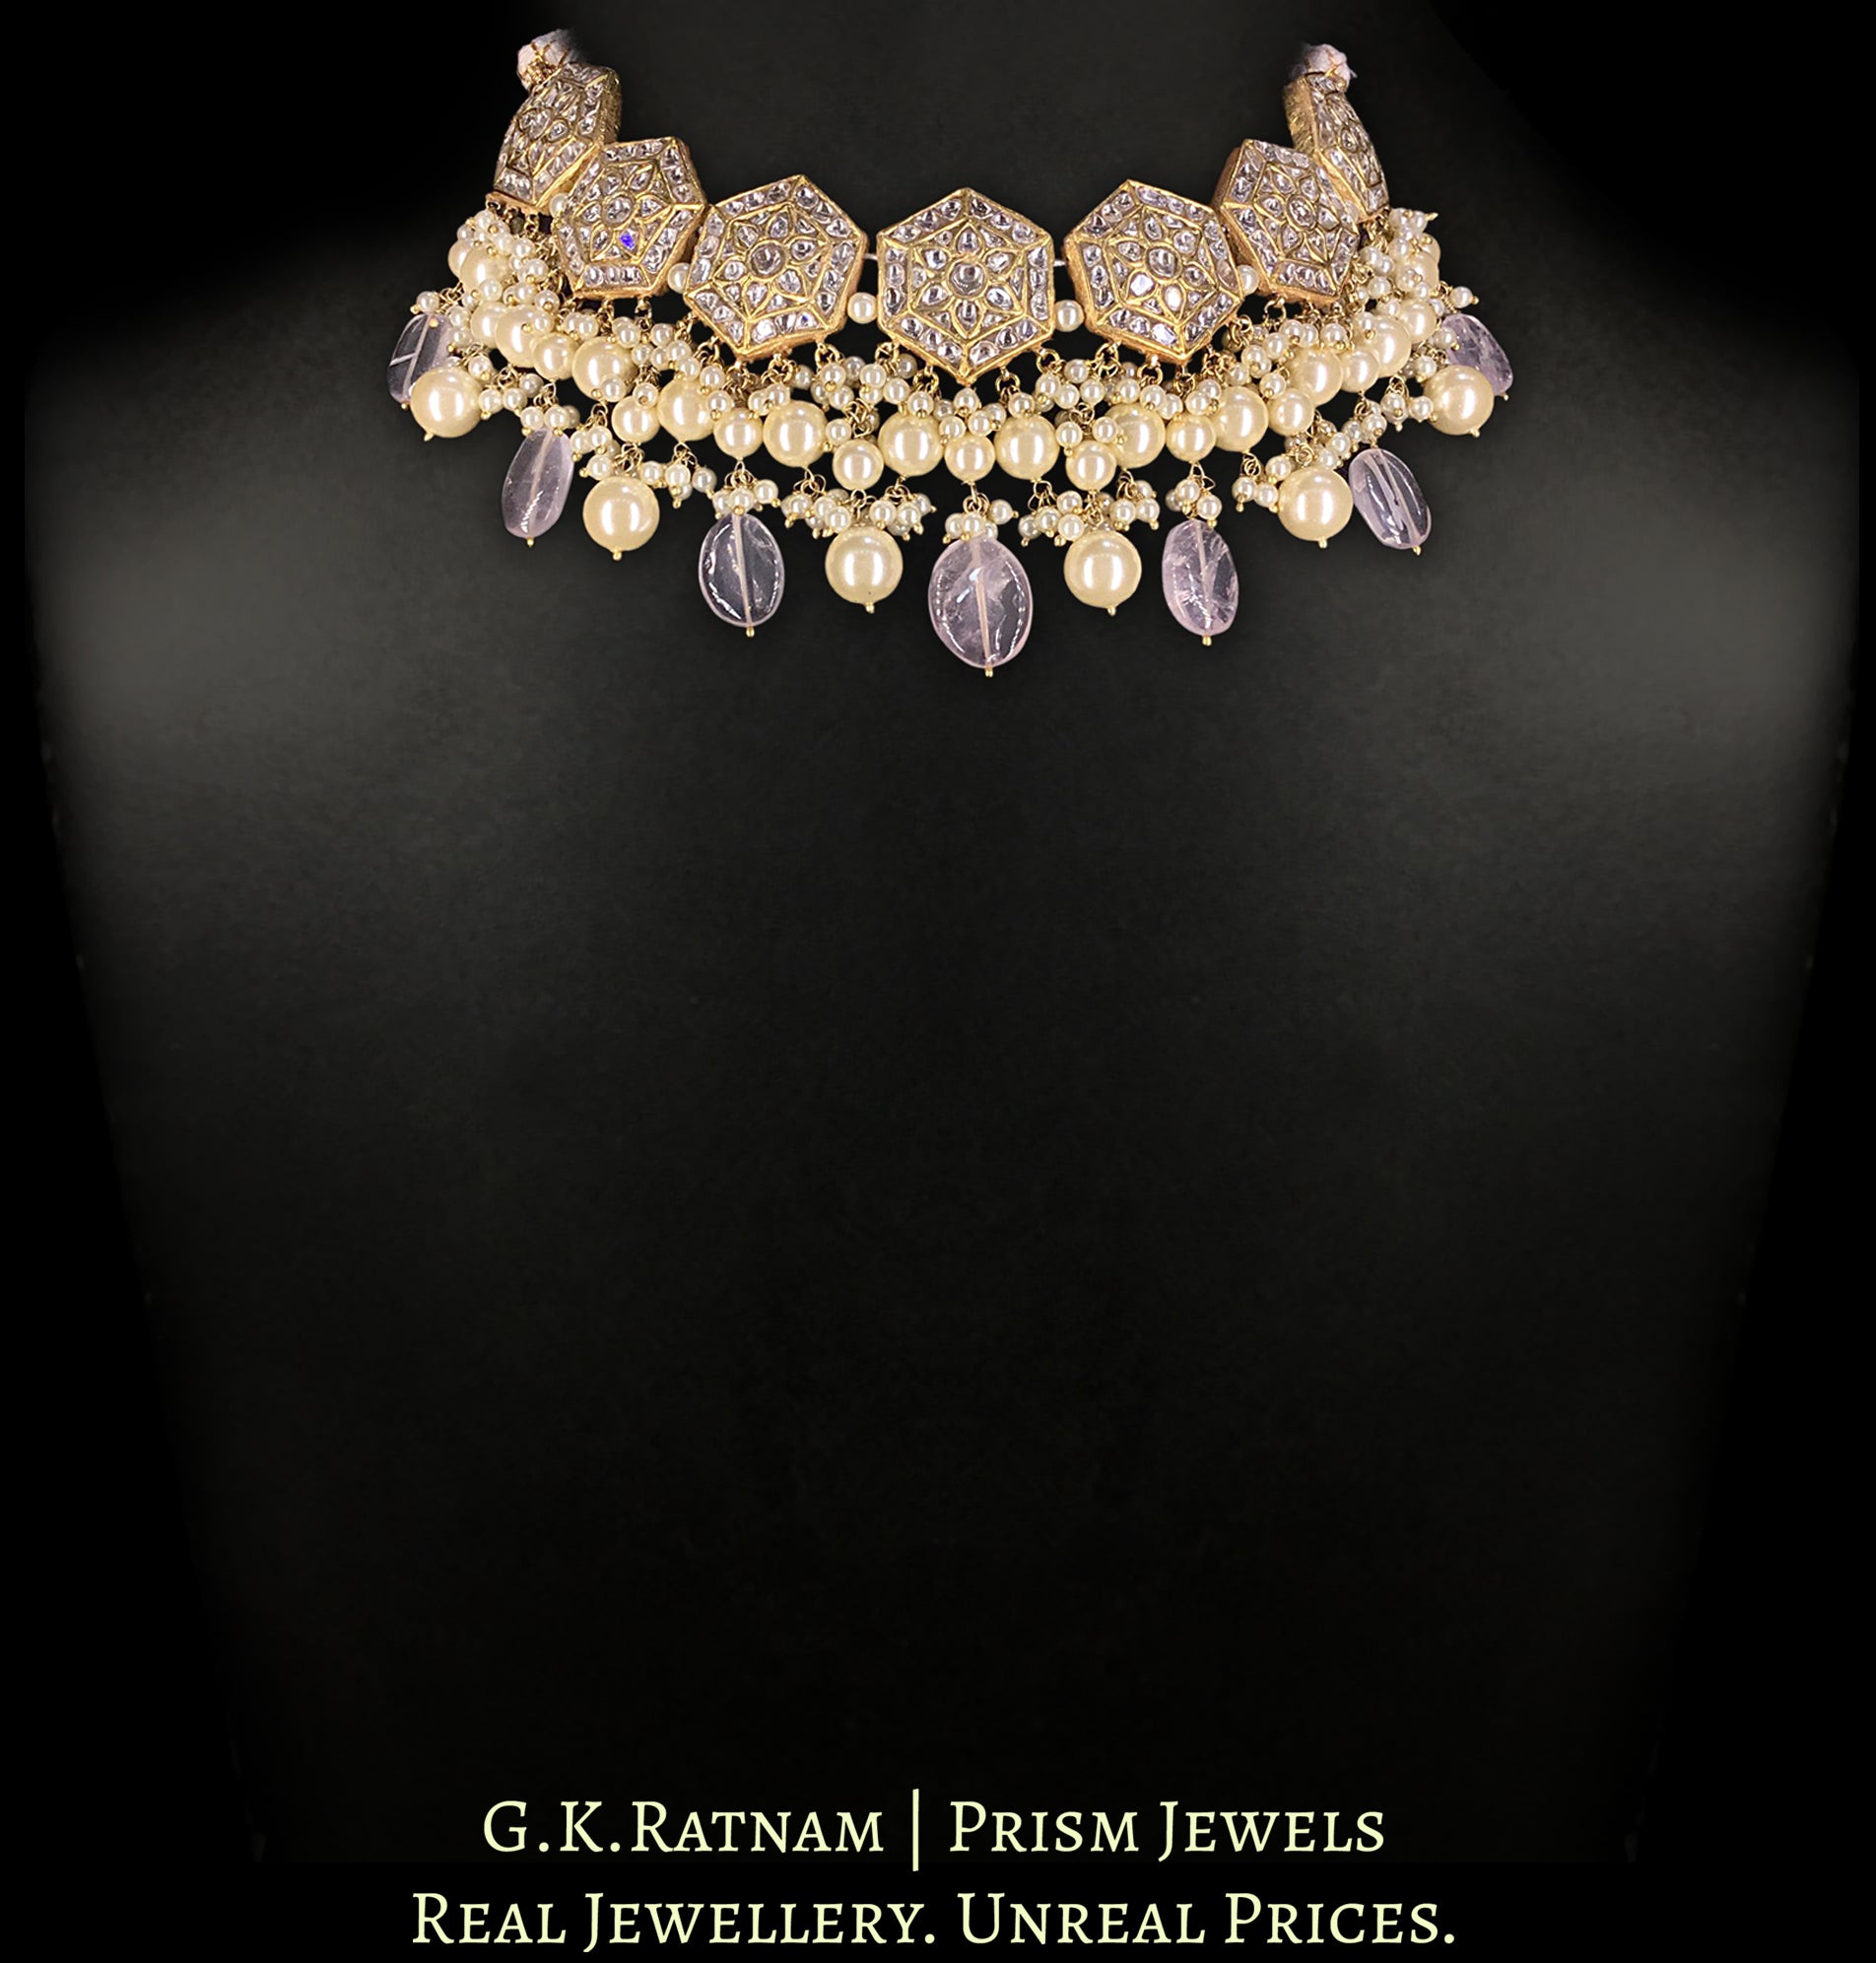 23k Gold and Diamond Polki Choker Necklace Set with Amethysts and Pearls